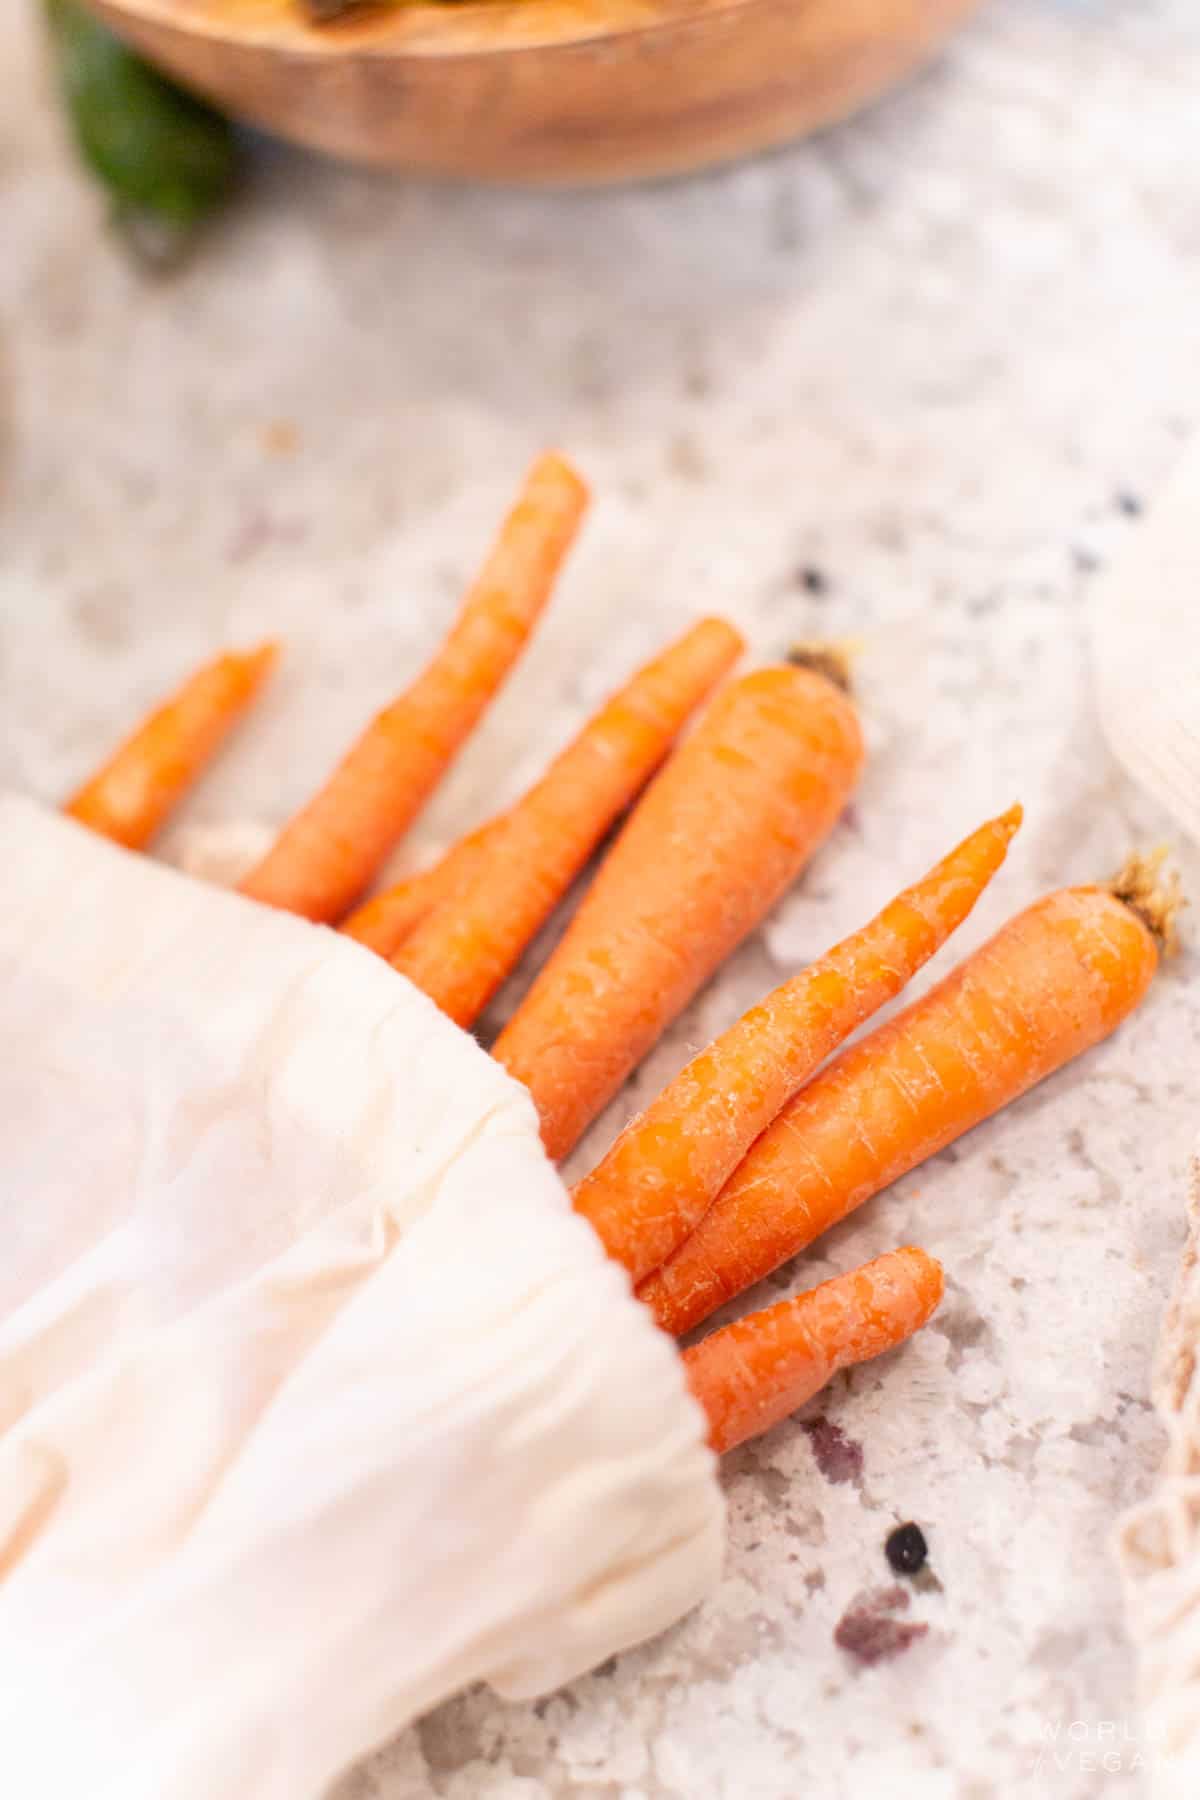 A sack of carrots laying on a countertop with the carrots poking out of the end of the bag.